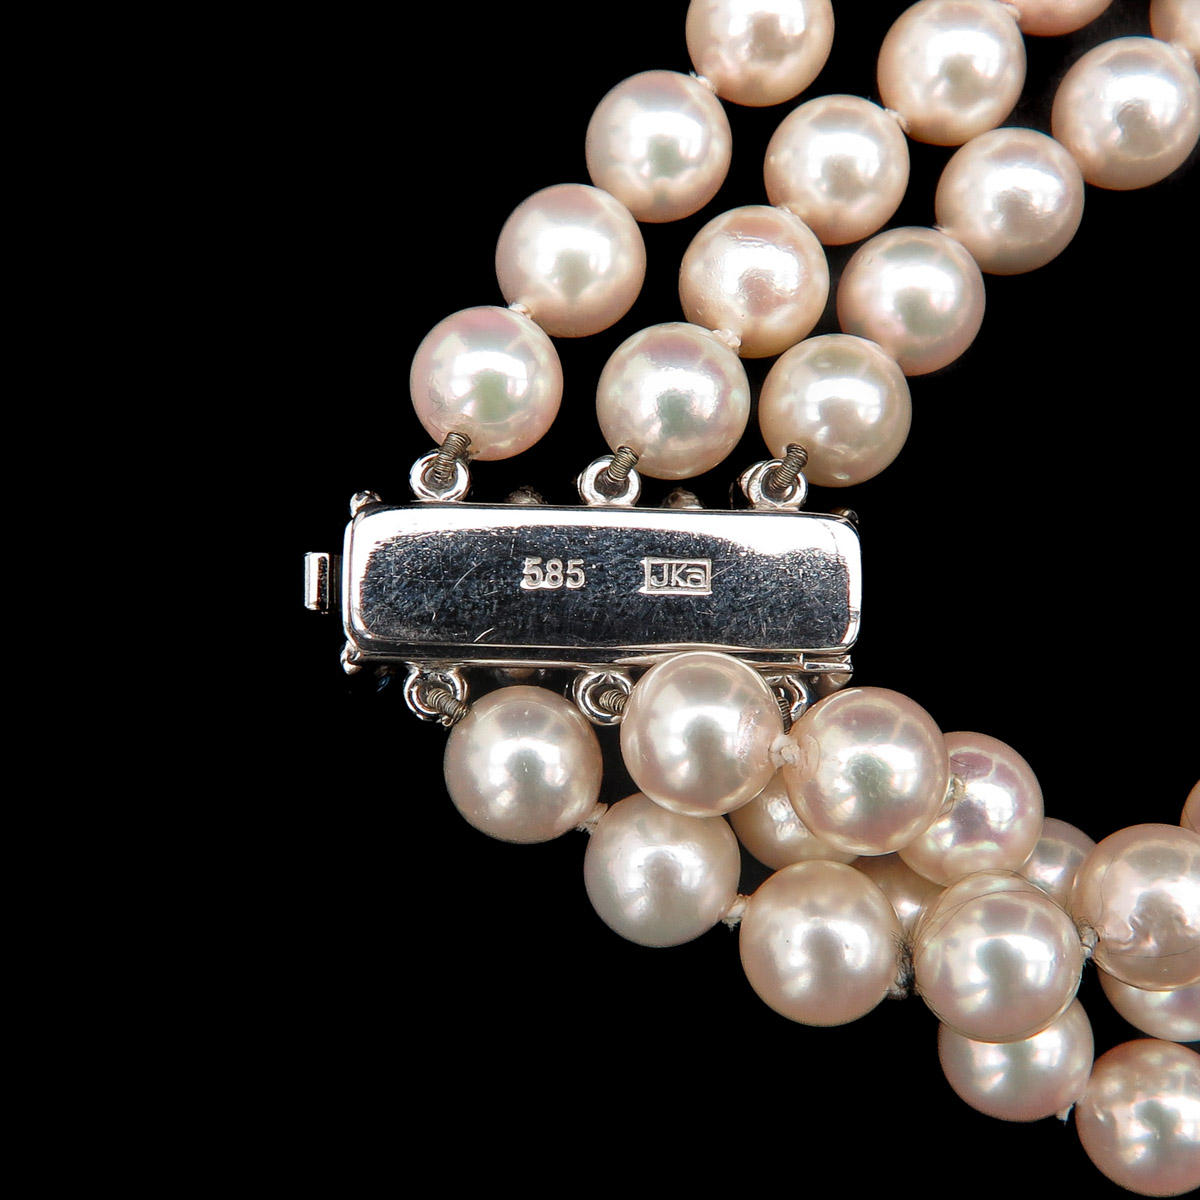 A Set of Pearl Jewelry - Image 7 of 10